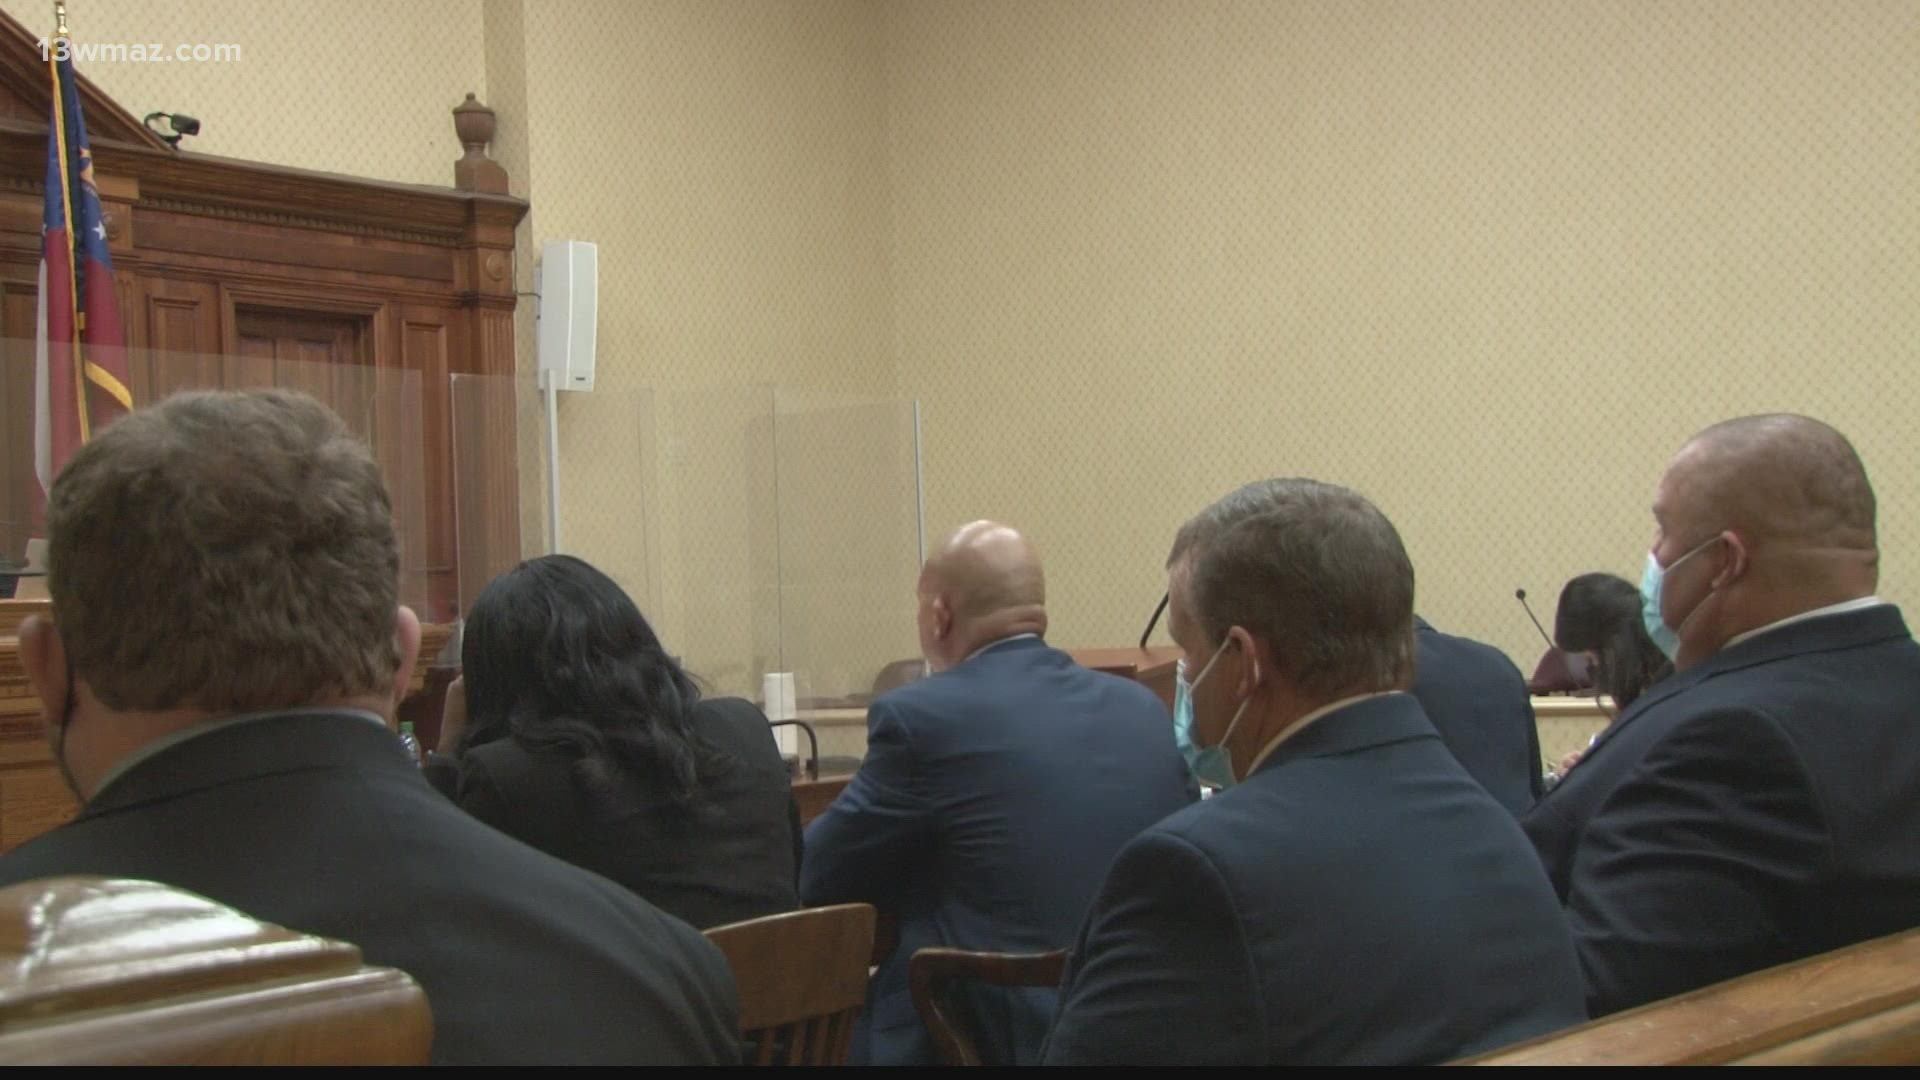 Wednesday was Day 3 of of jury selection, but defense lawyers weren't happy with what they were hearing and asked the judge to make a change.